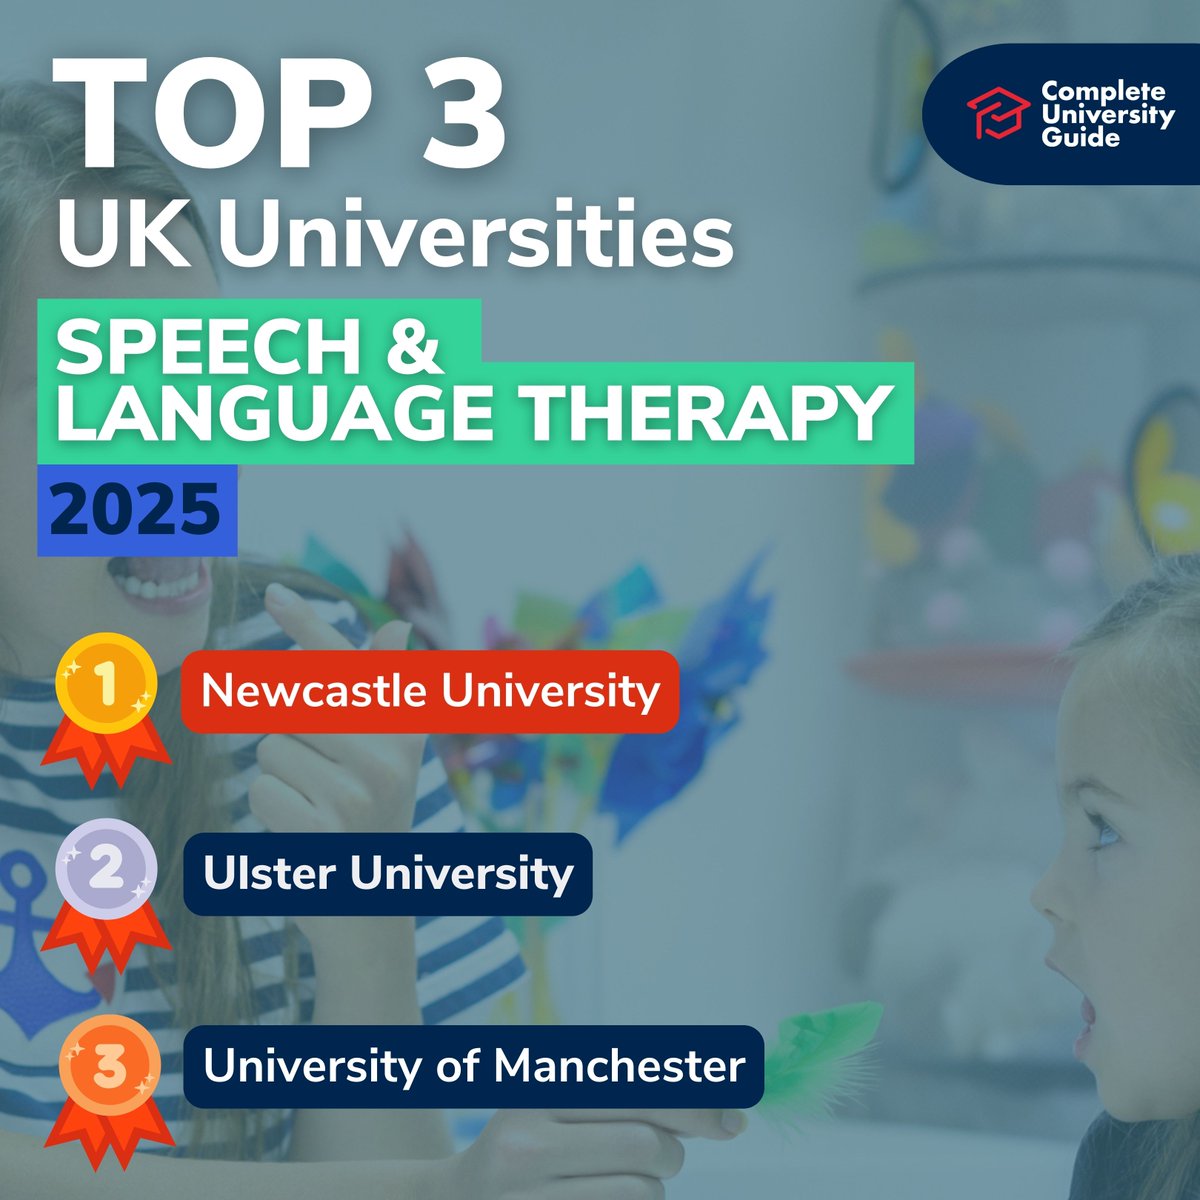 Speech & Language Therapy courses teach you how to identify and treat issues to do with the ear and voice. Full table 👉 bit.ly/4dGSfca These are the top 3 unis to study it for 2025. @UniofNewcastle @UlsterUni @OfficialUoM #leaguetables2025 #rankings #university